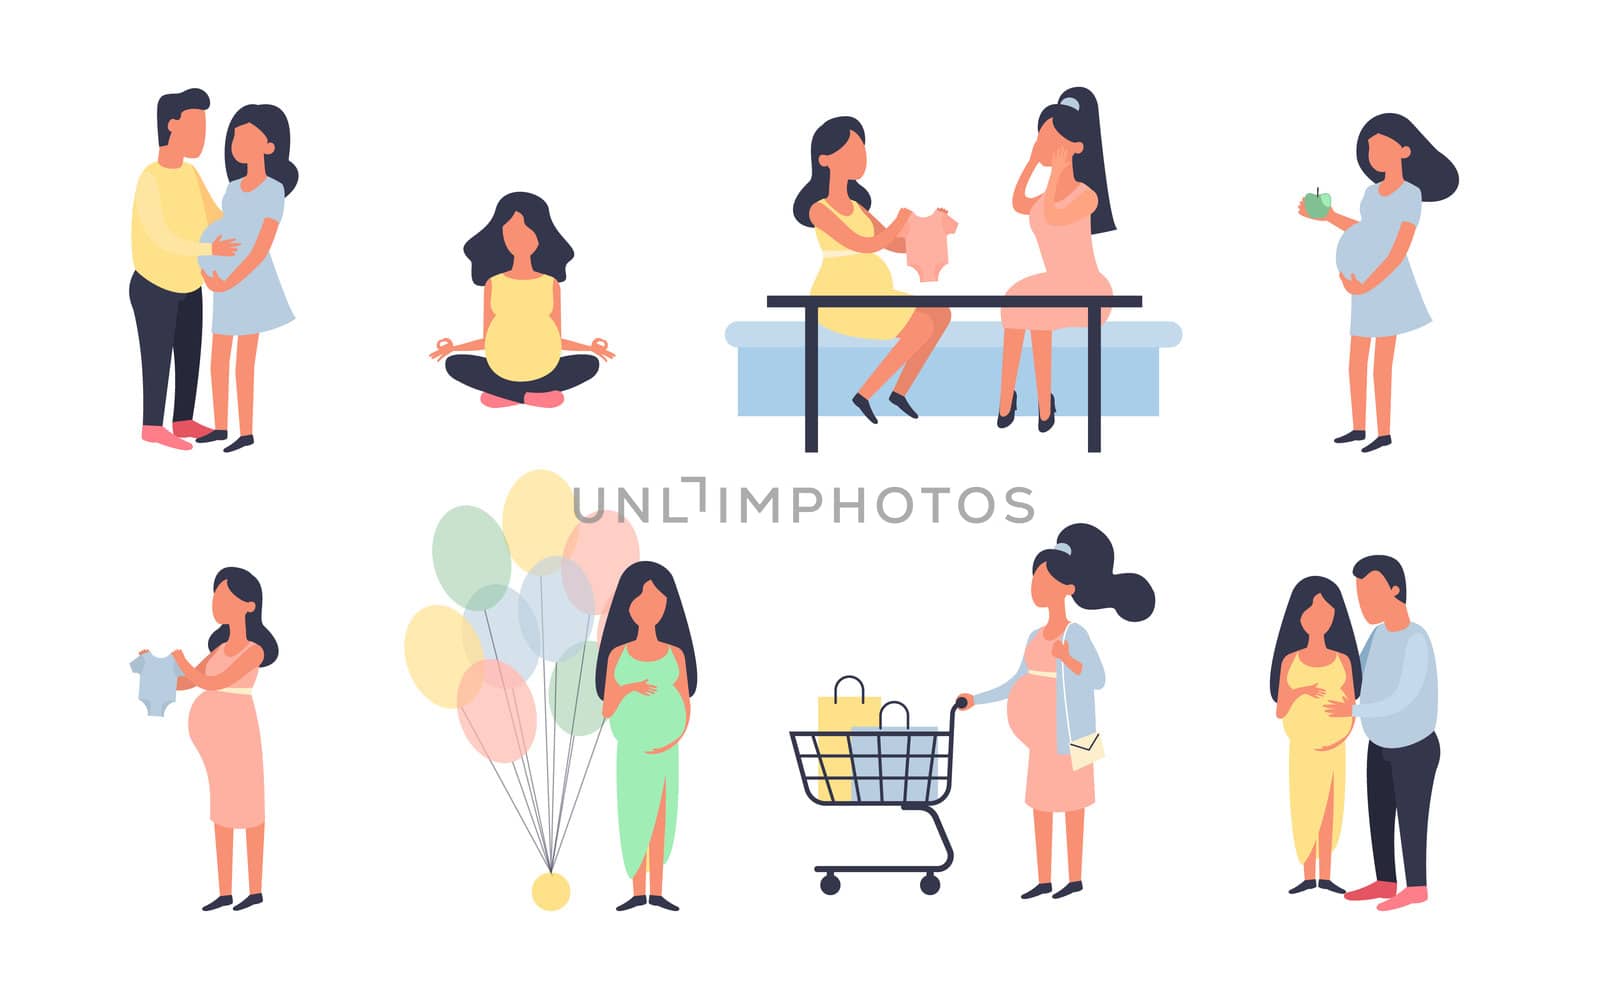 Pregnant woman. Pregnancy illustration set. Walking, healthy nutrition during pregnancy, purchase, baby shower and other situations. Character design. Daily activities, shopping by Elena_Garder